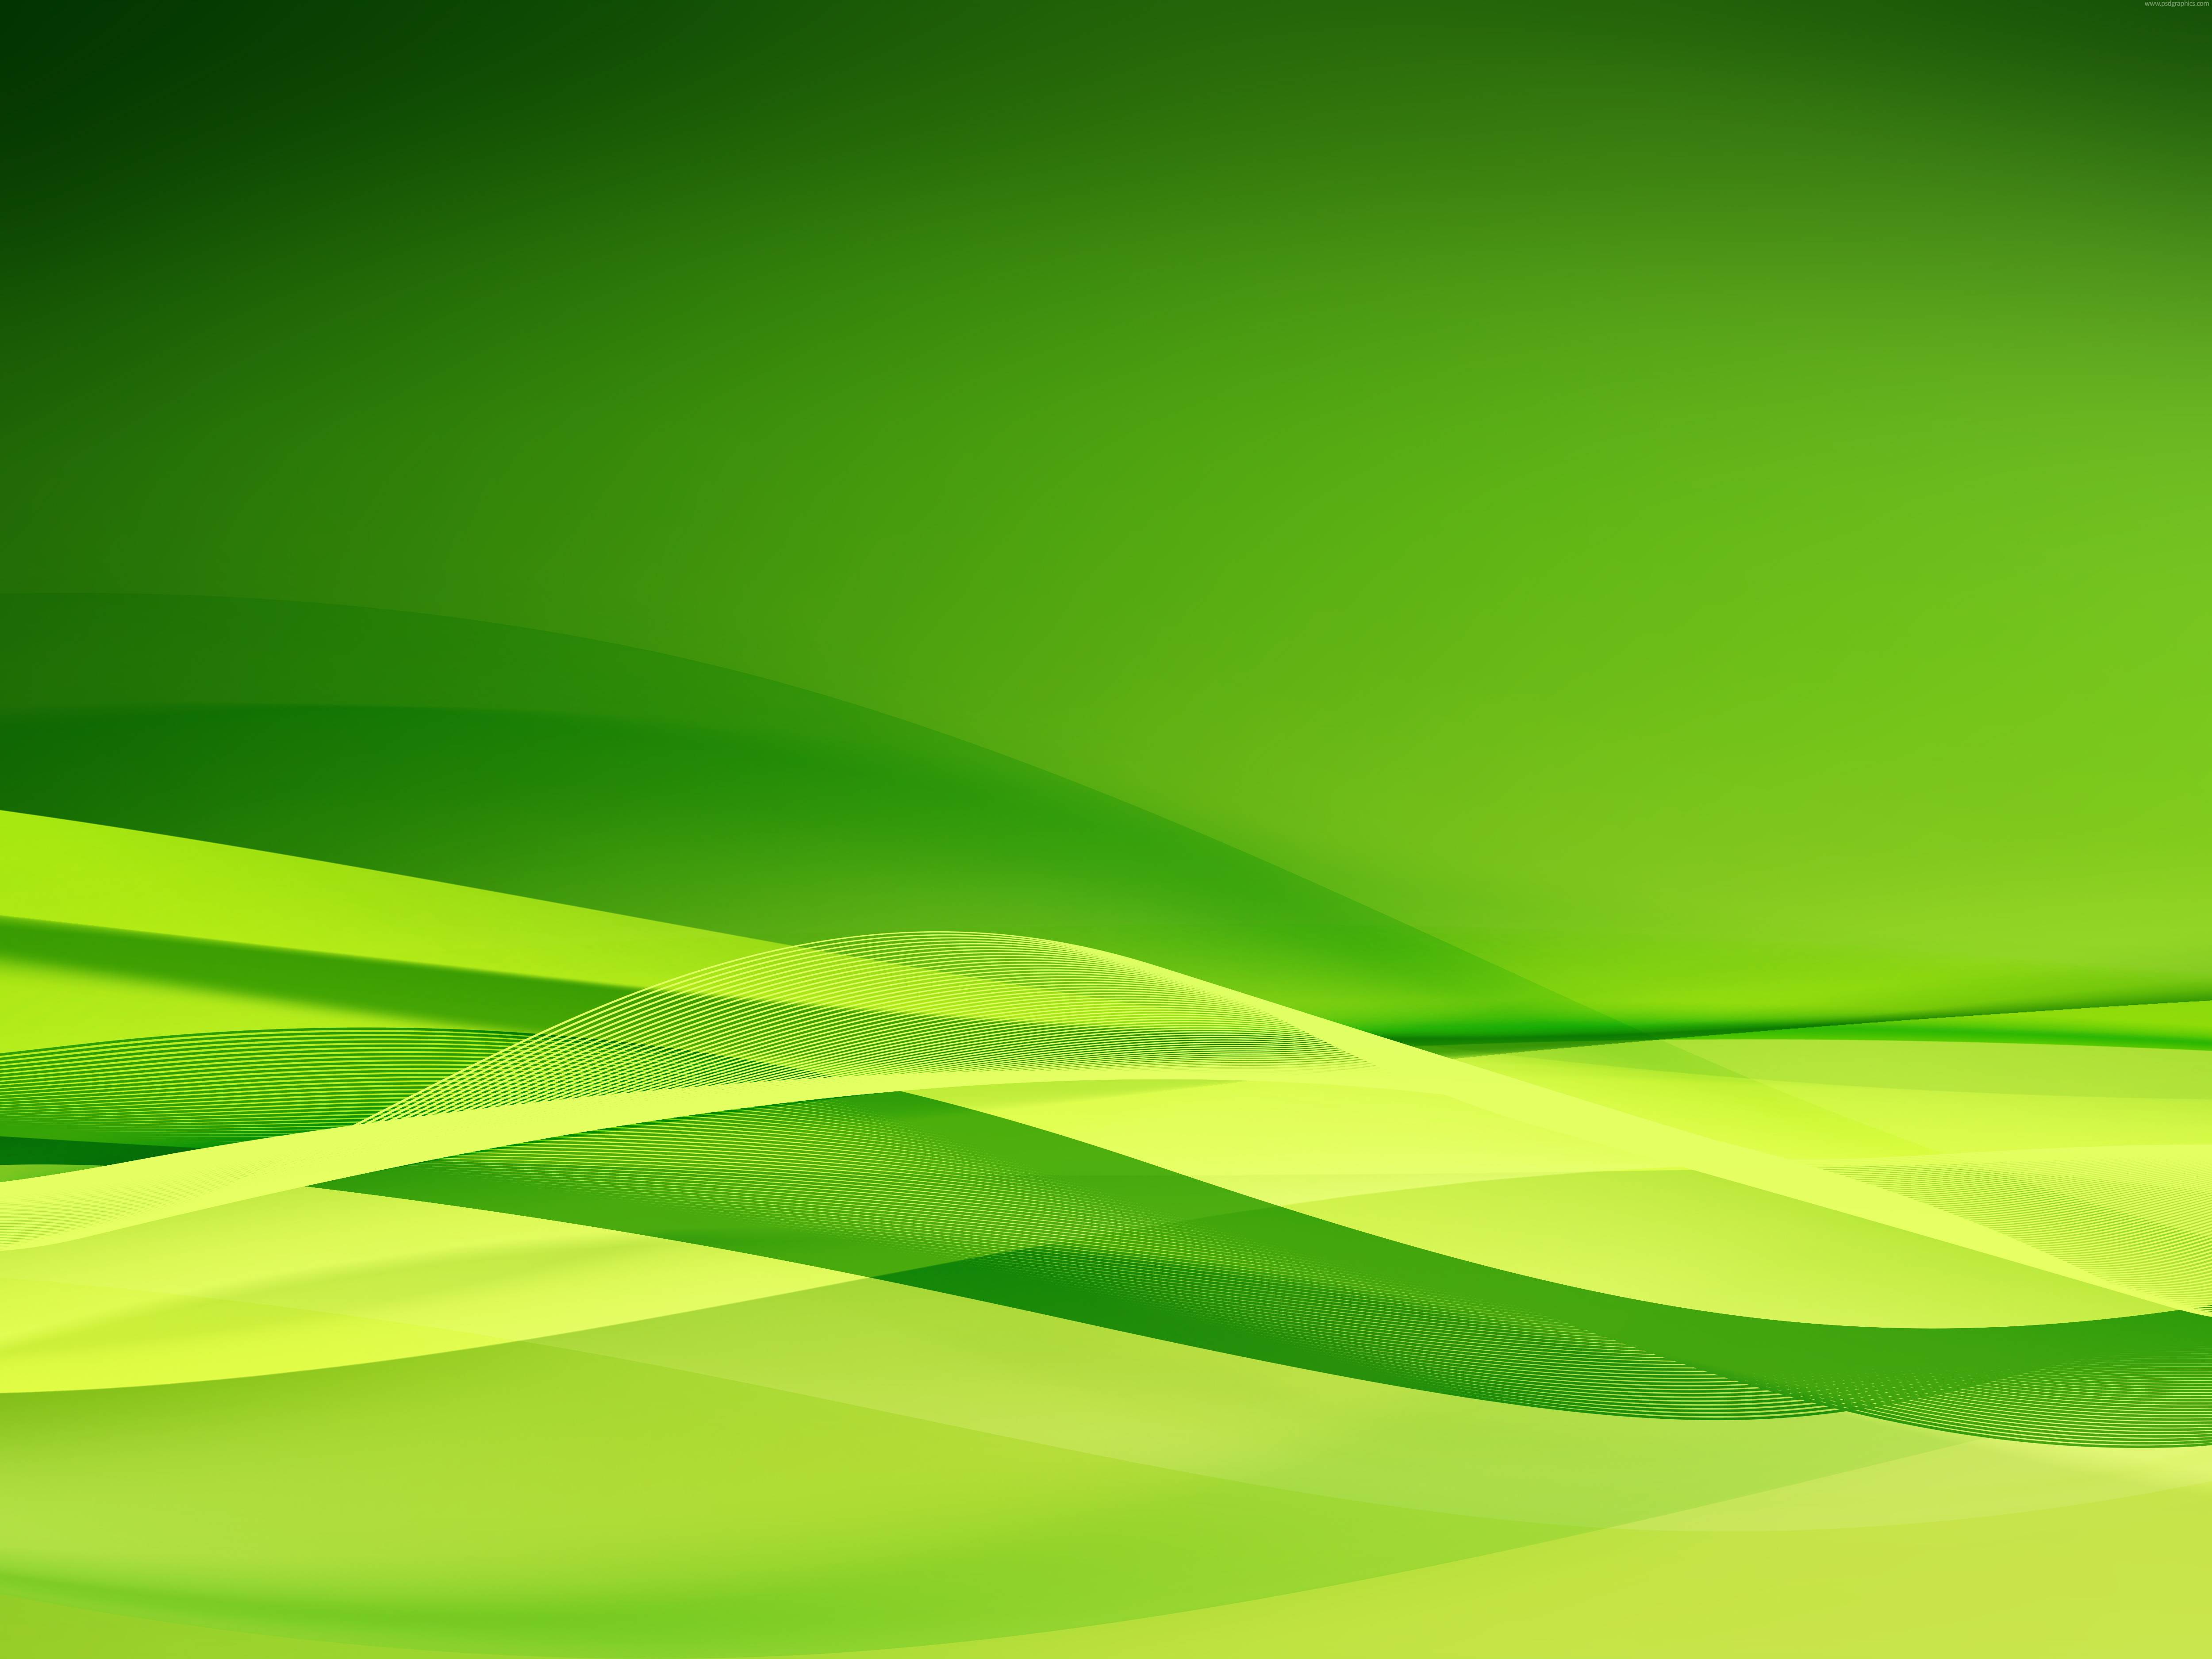 hd lime green backgrounds 2021 cute wallpapers on lime green backgrounds